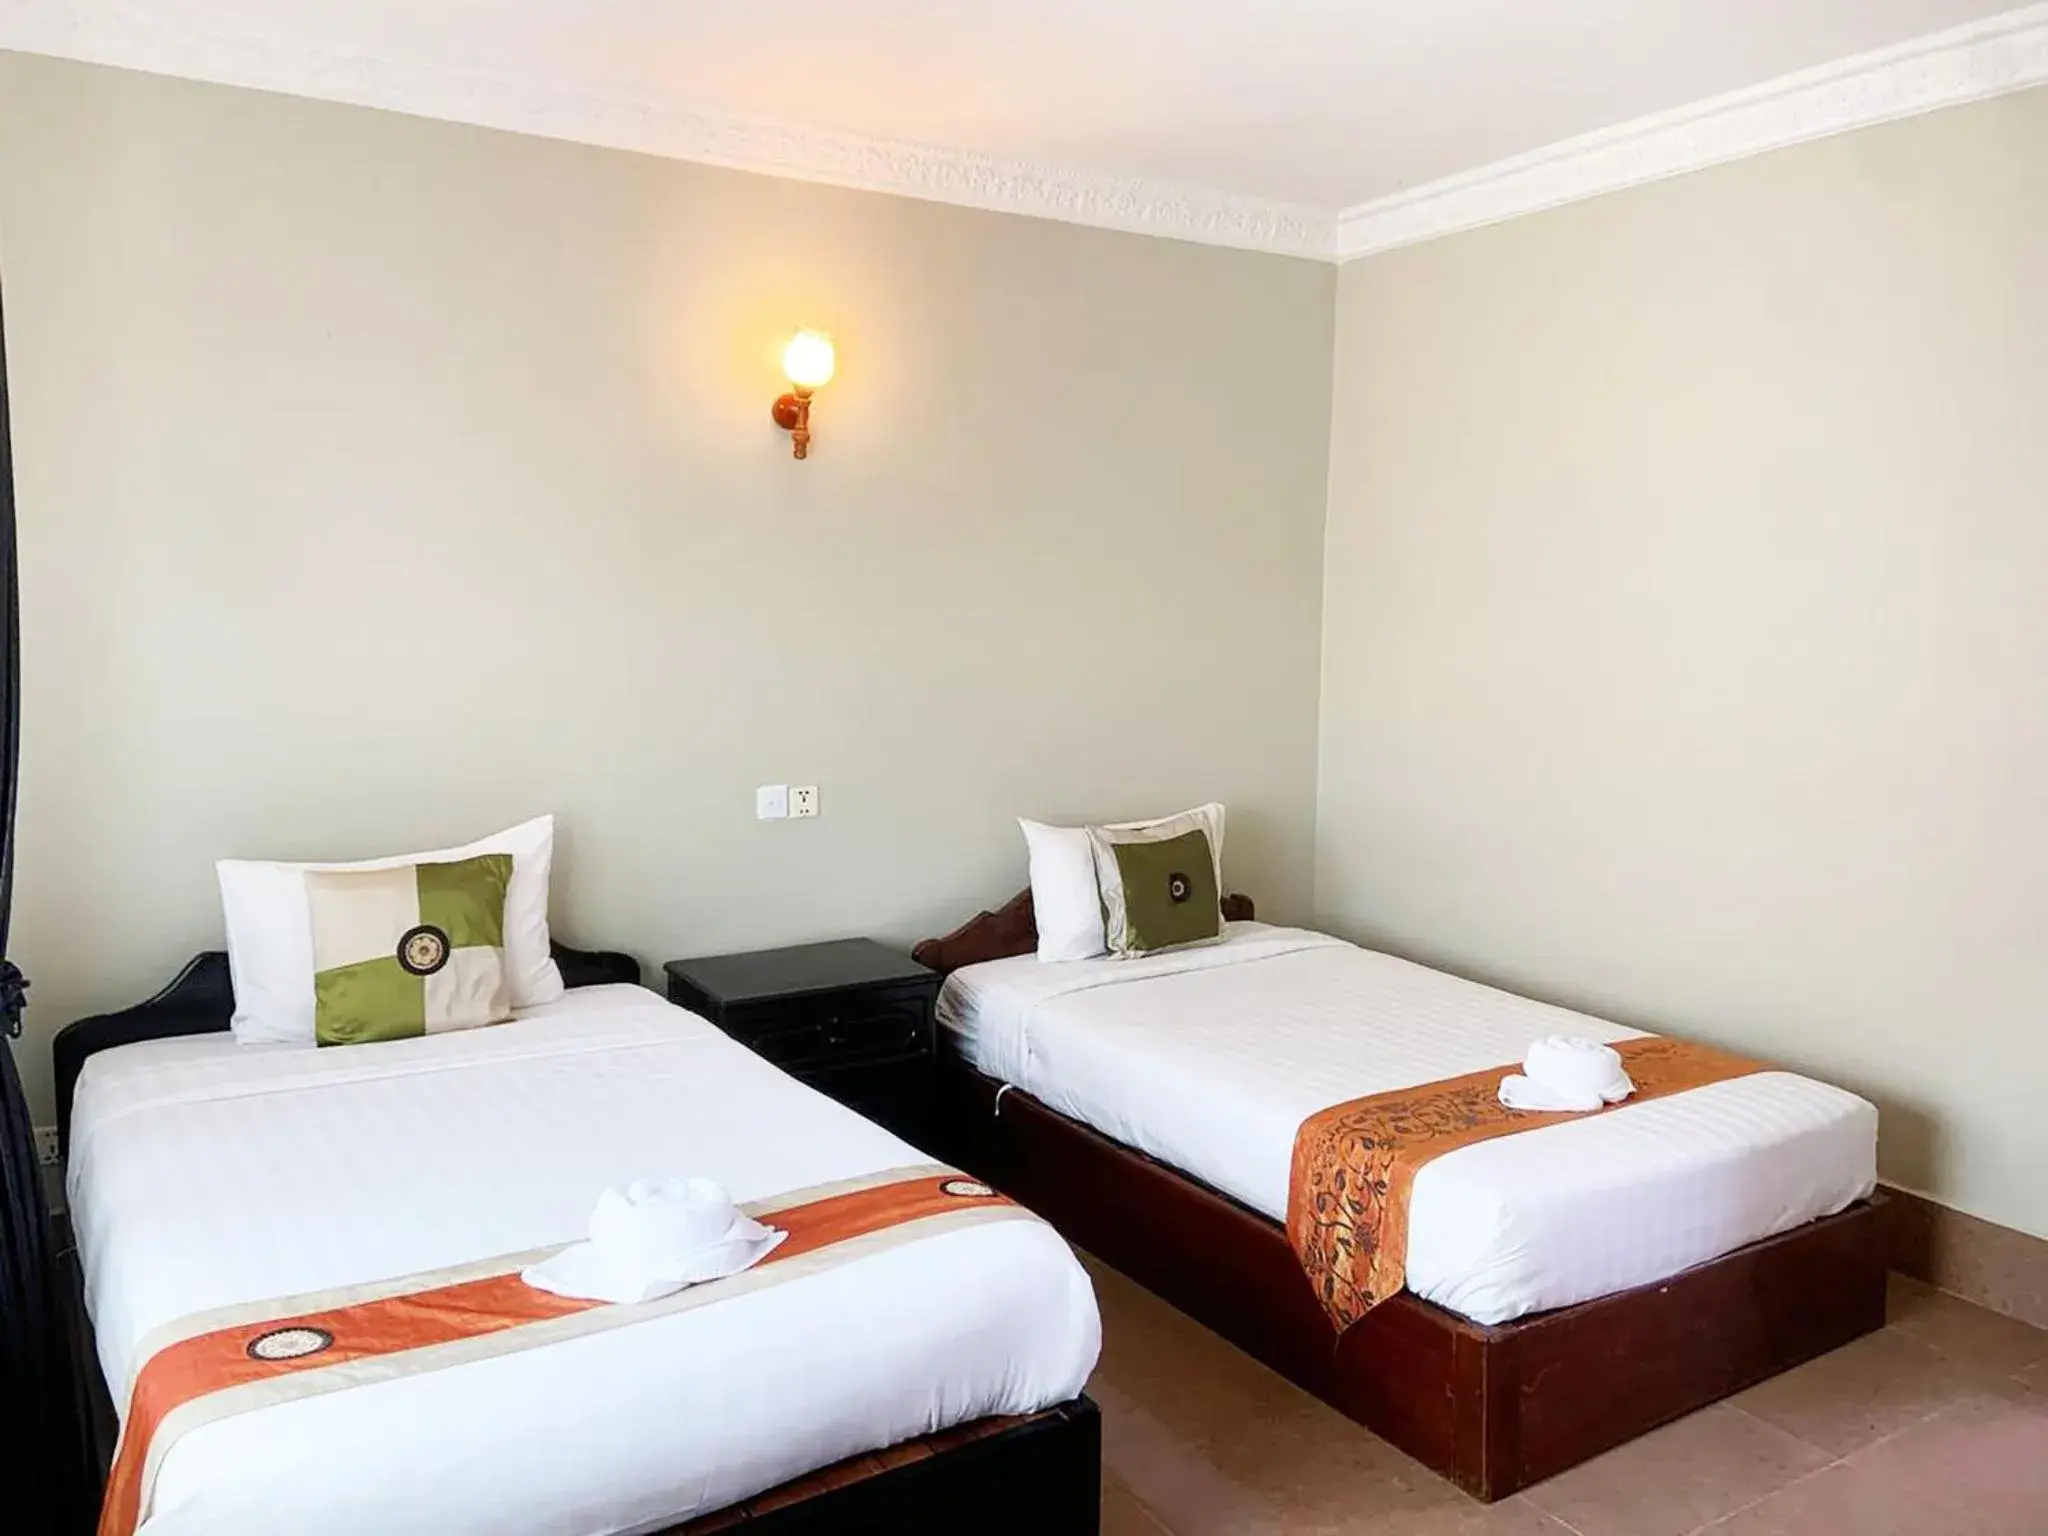 Property building, Bed in Central Night Hotel